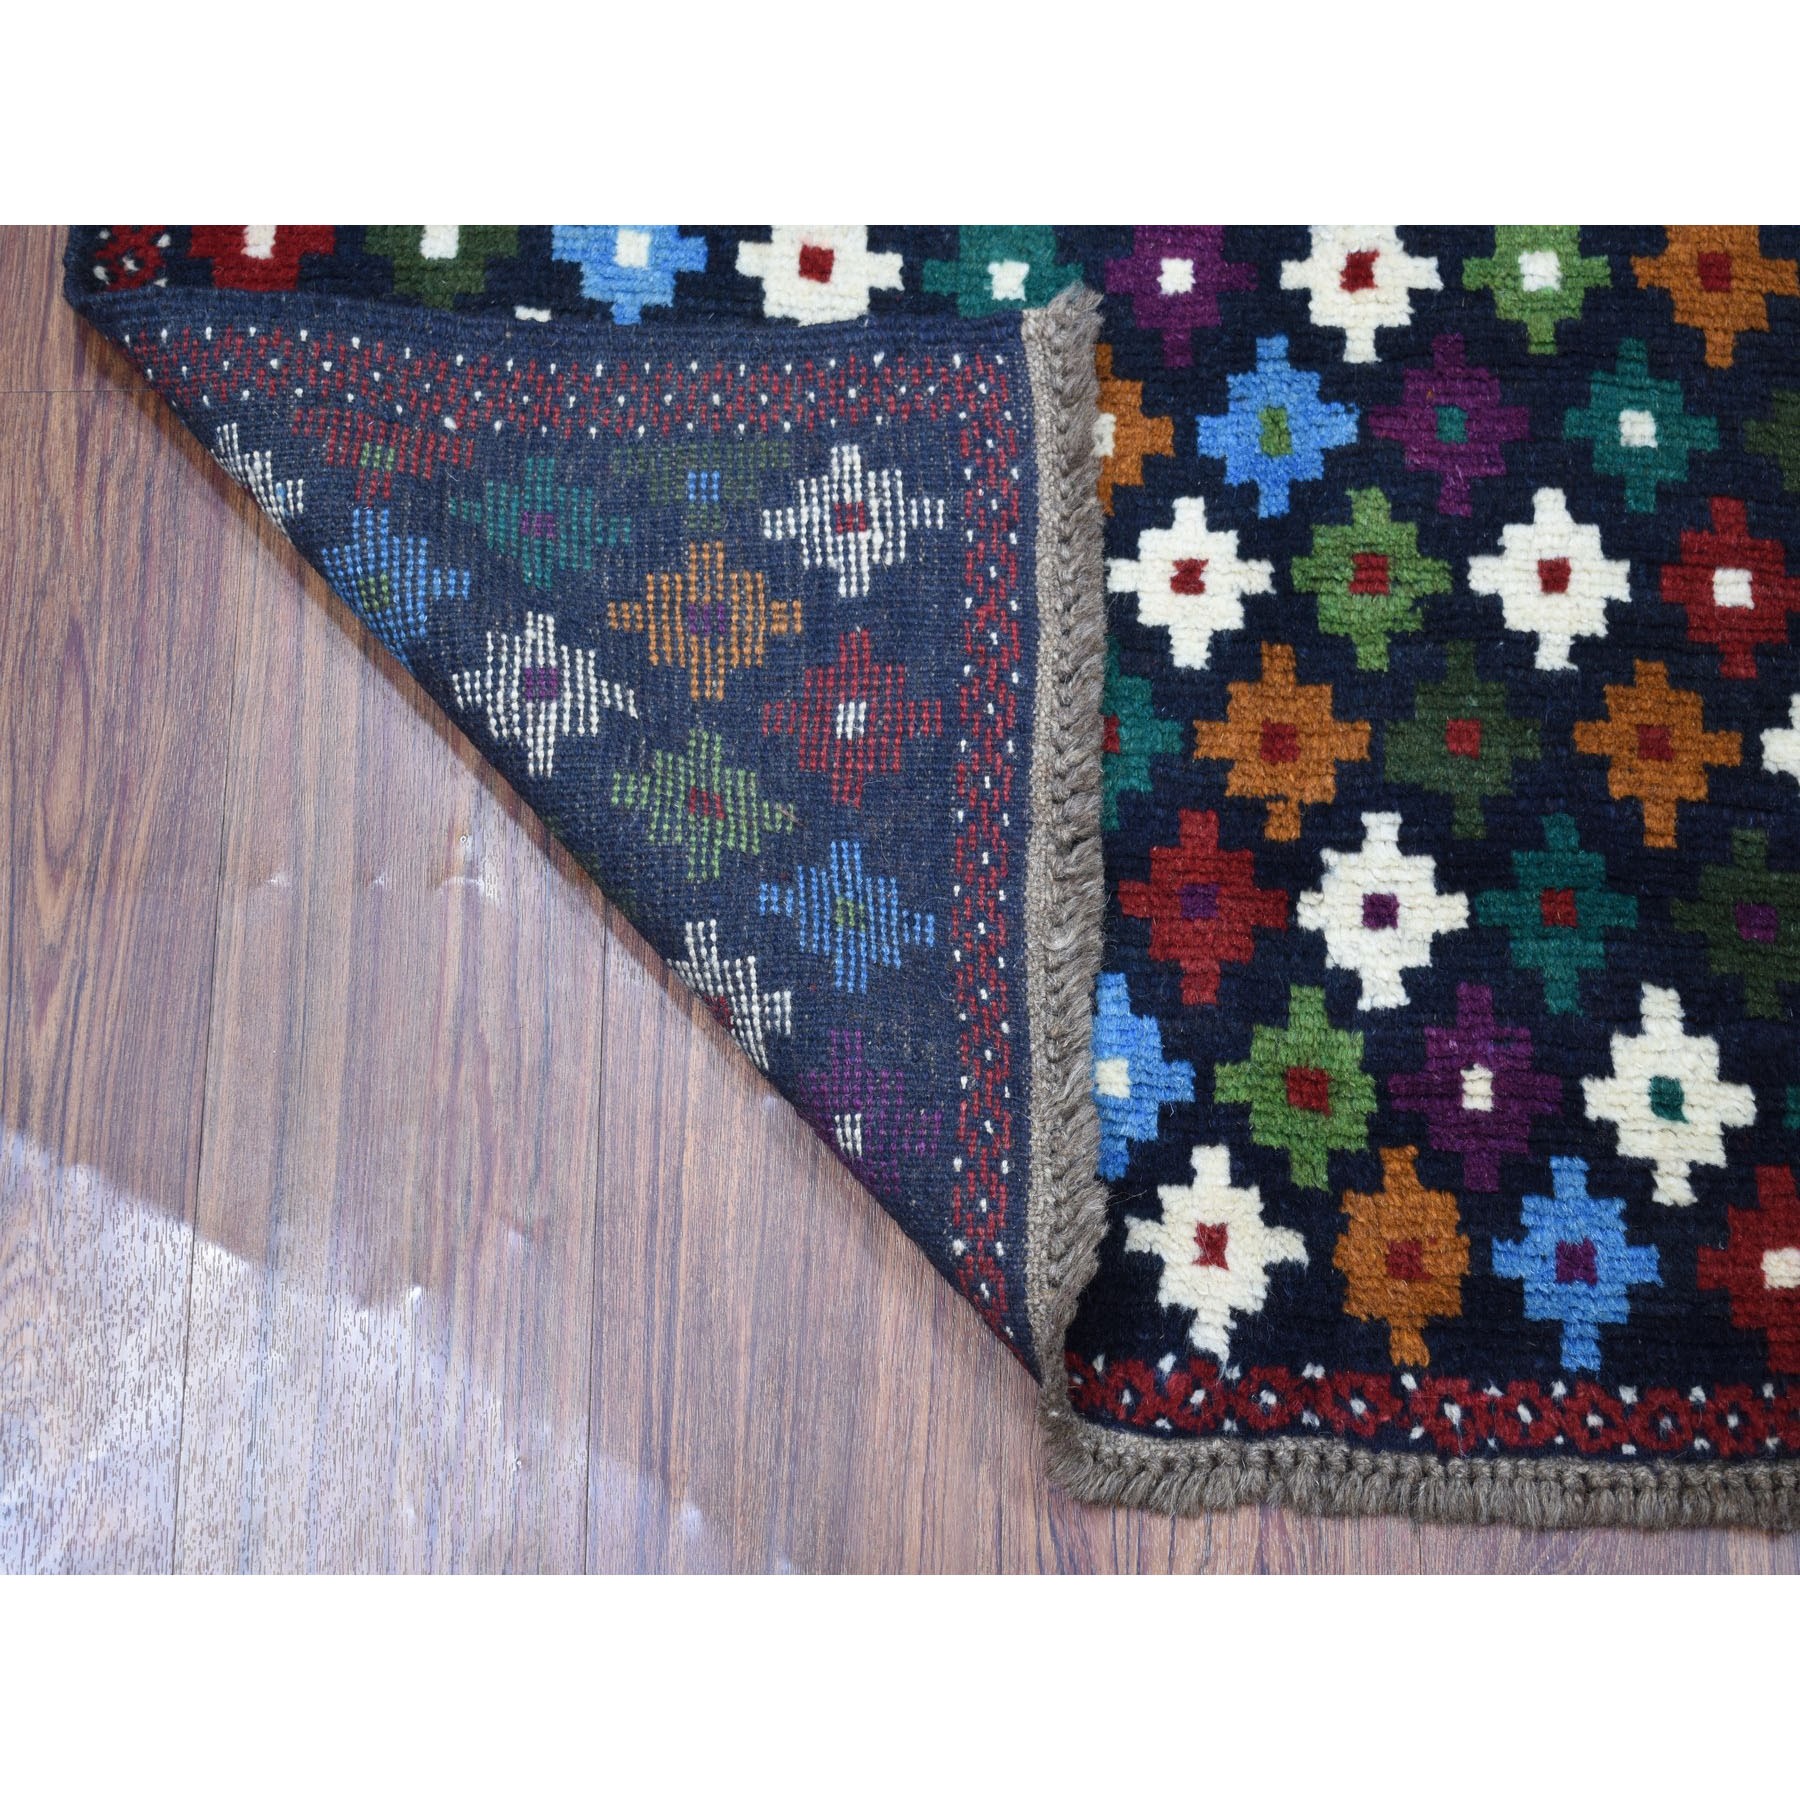 3'4"x4'8" Blue Colorful Afghan Baluch All Over Design Pure Wool Hand Woven Oriental Rug 